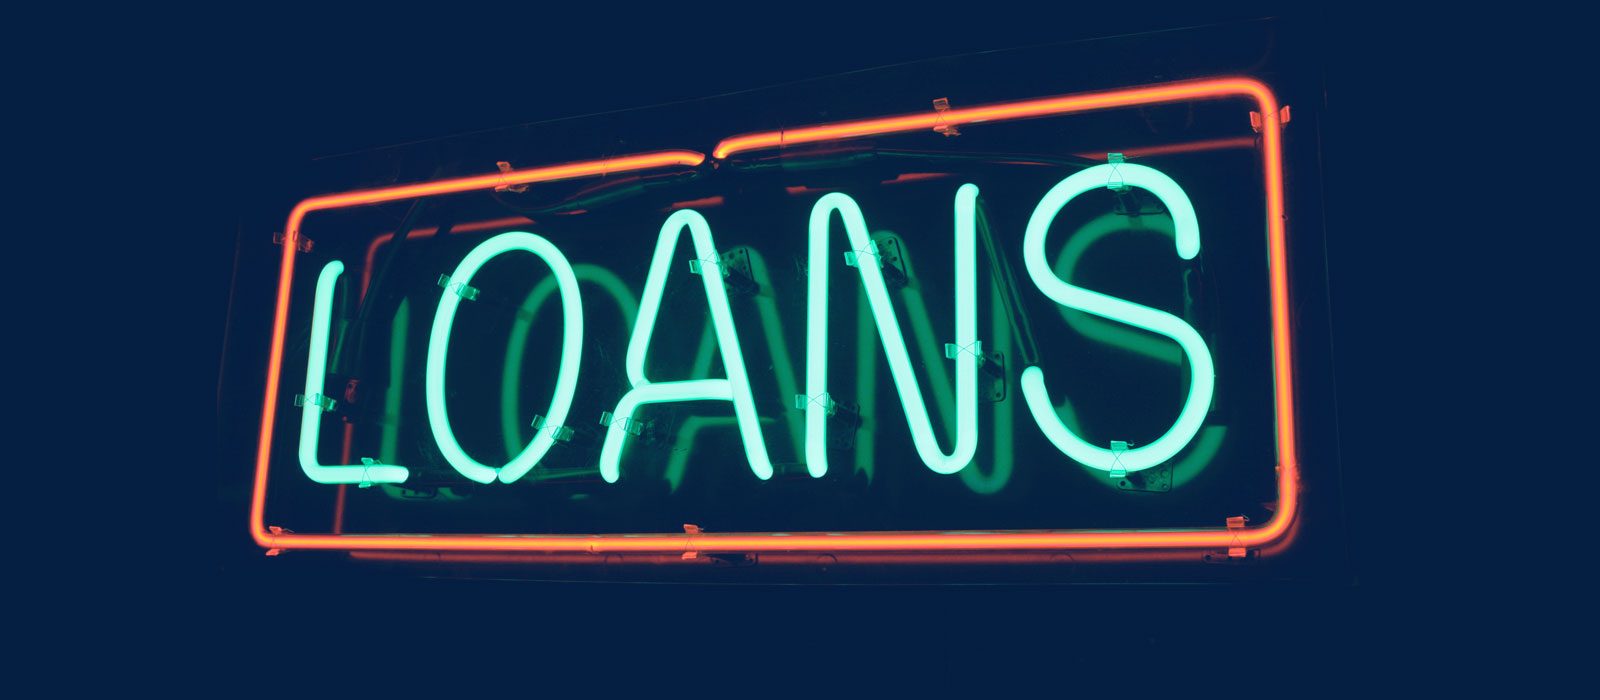 Has the secured loan industry been hit by Googles Payday Loans updates